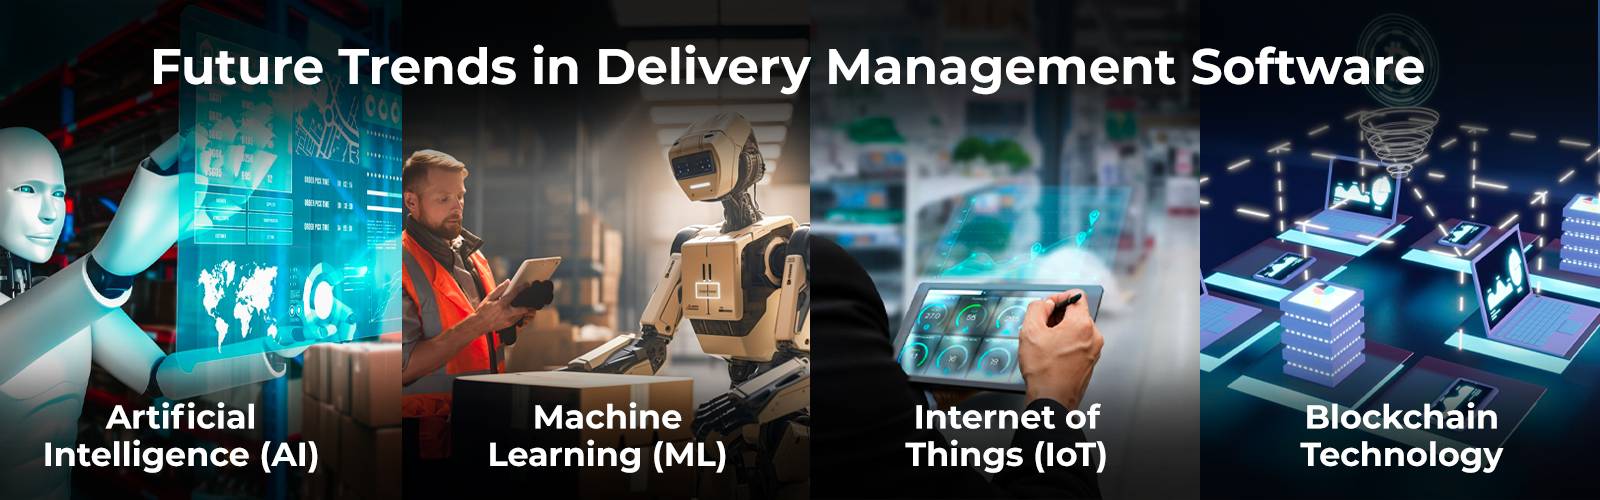 Future Trends in Delivery Management Software